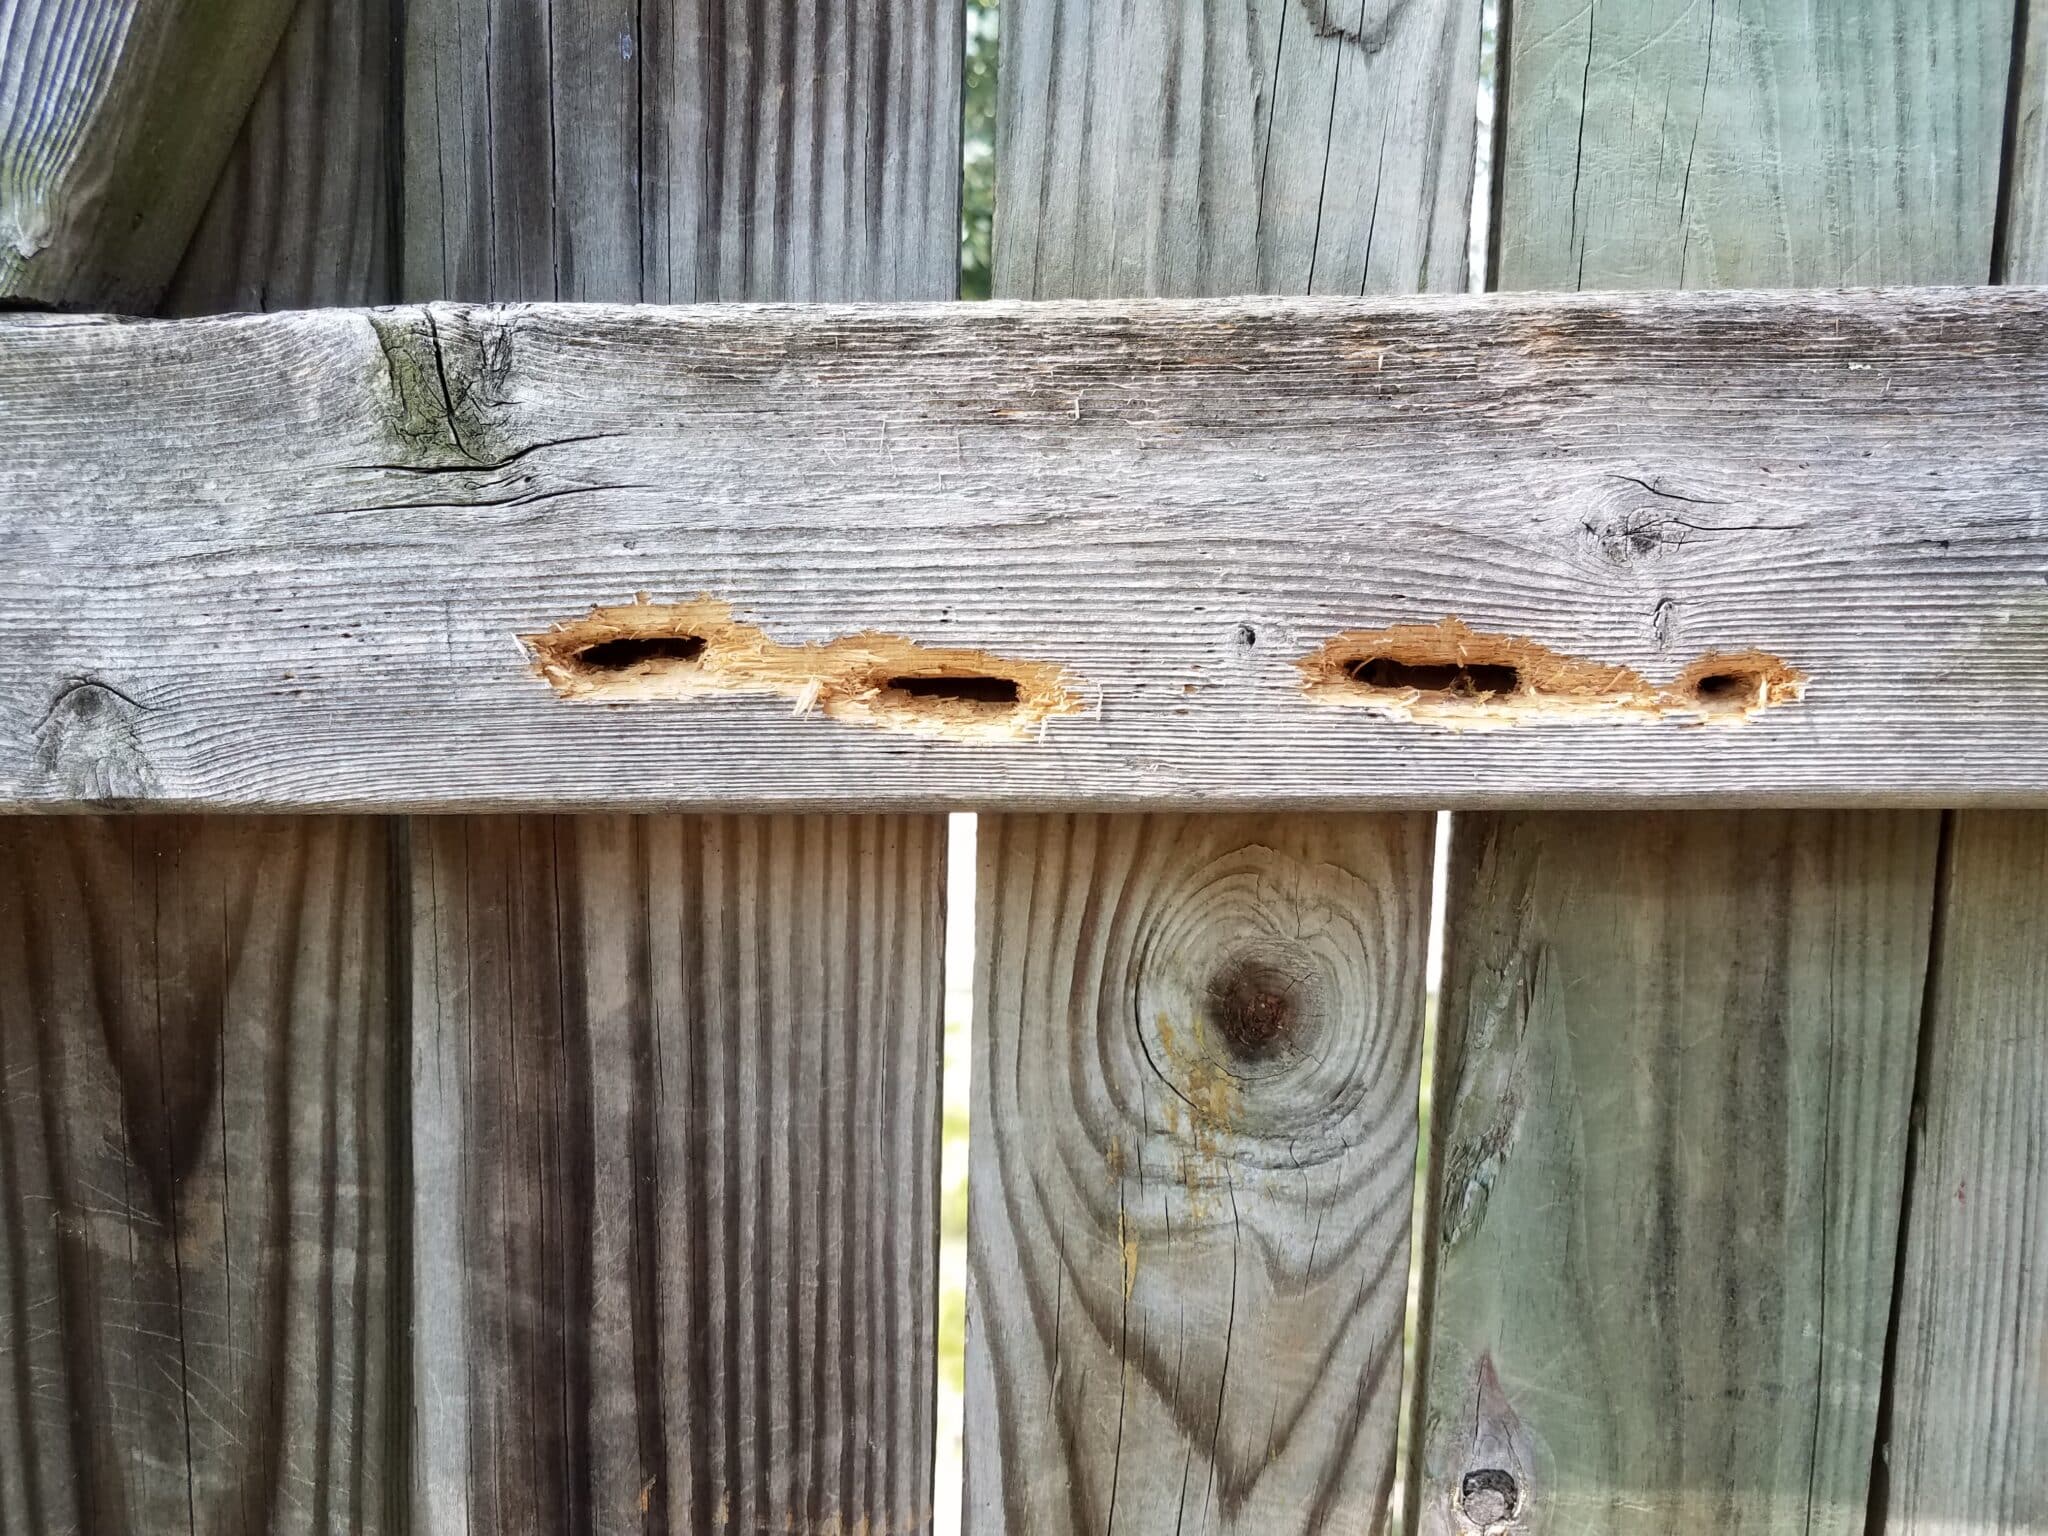 Holes in a fence caused by carpenter bees.